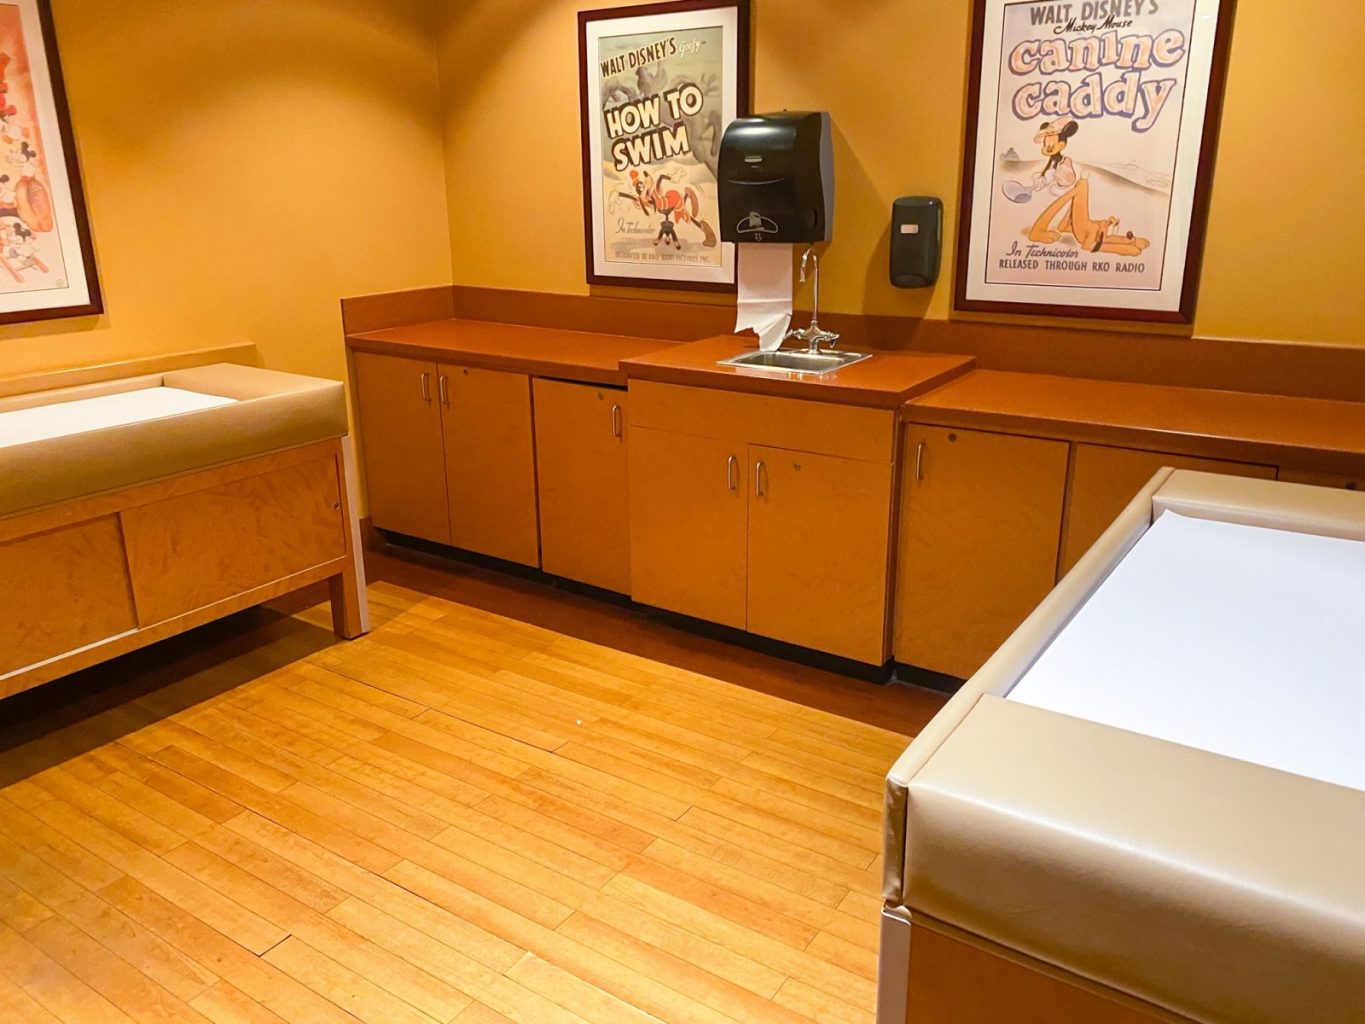 Disney baby center changing area